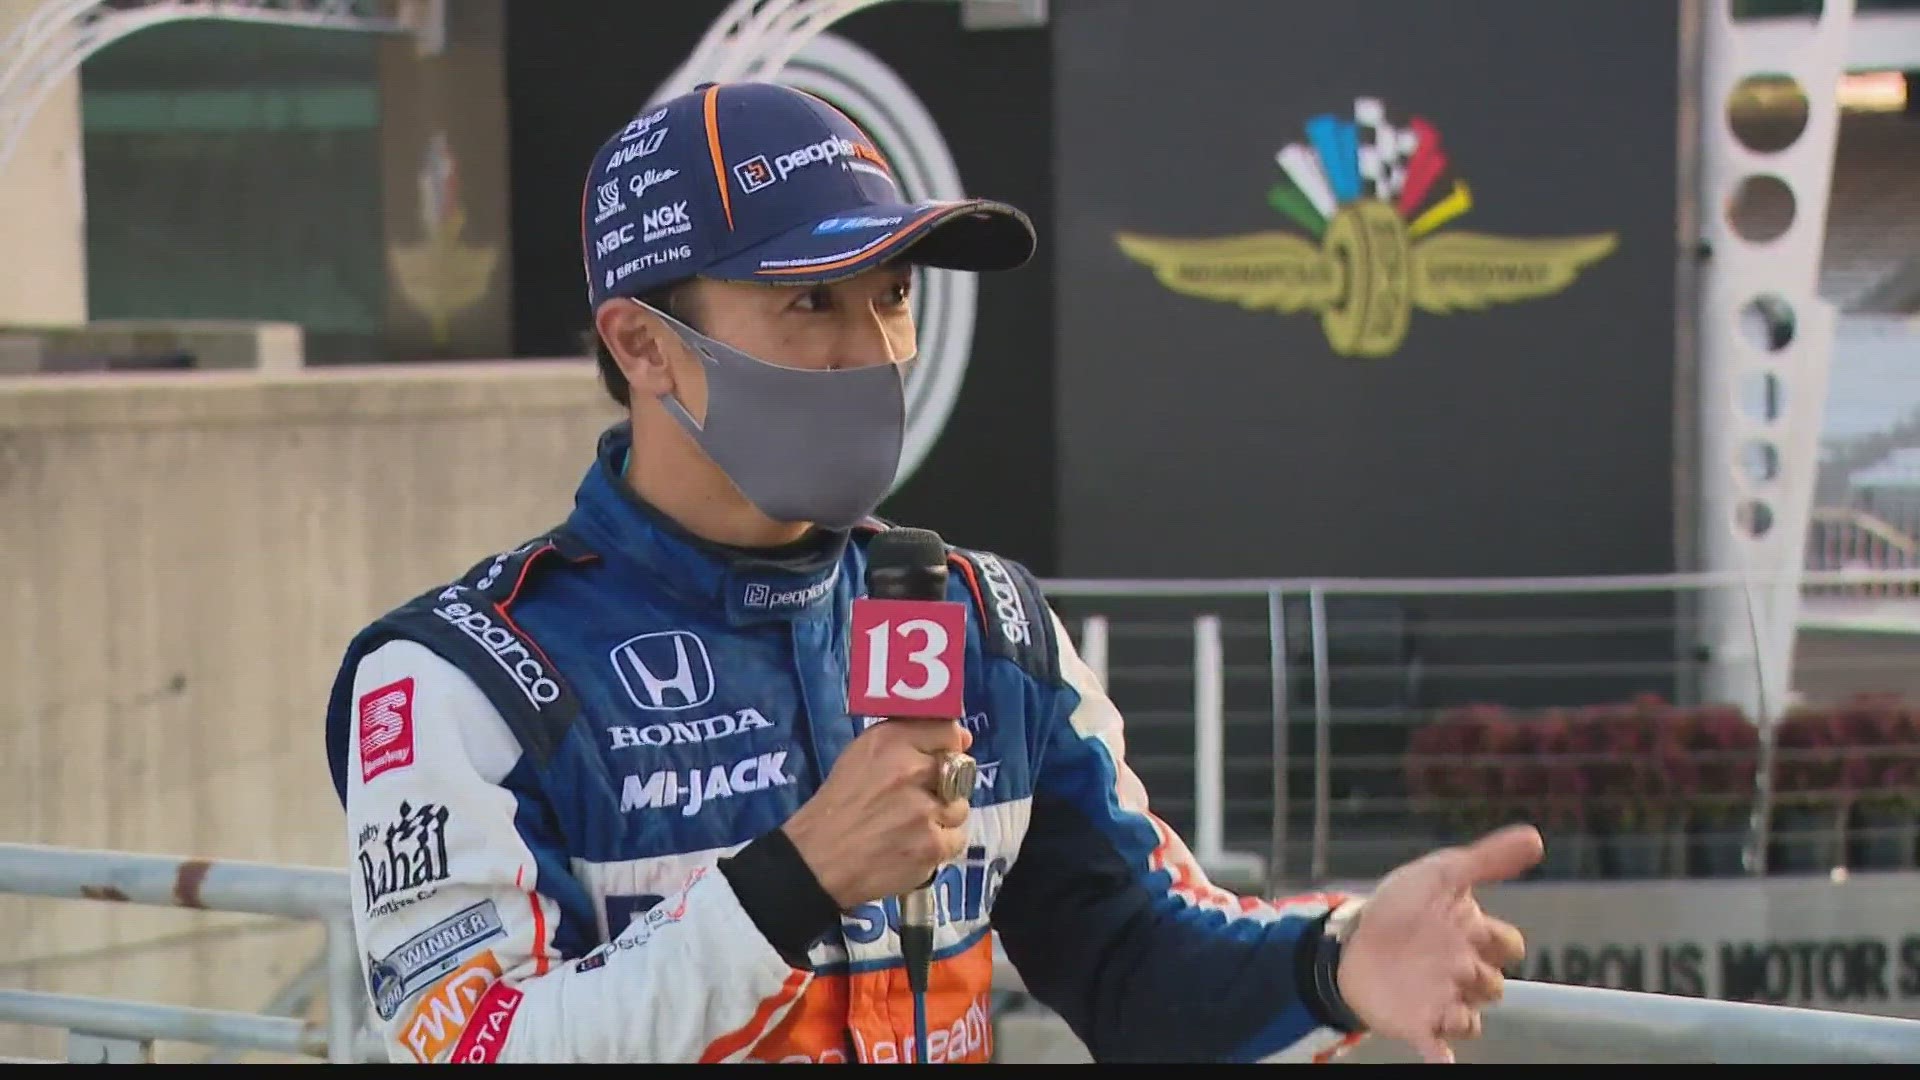 Two-time Indianapolis 500 champion Takuma Sato talks with Dave Calabro after Sunday's race.